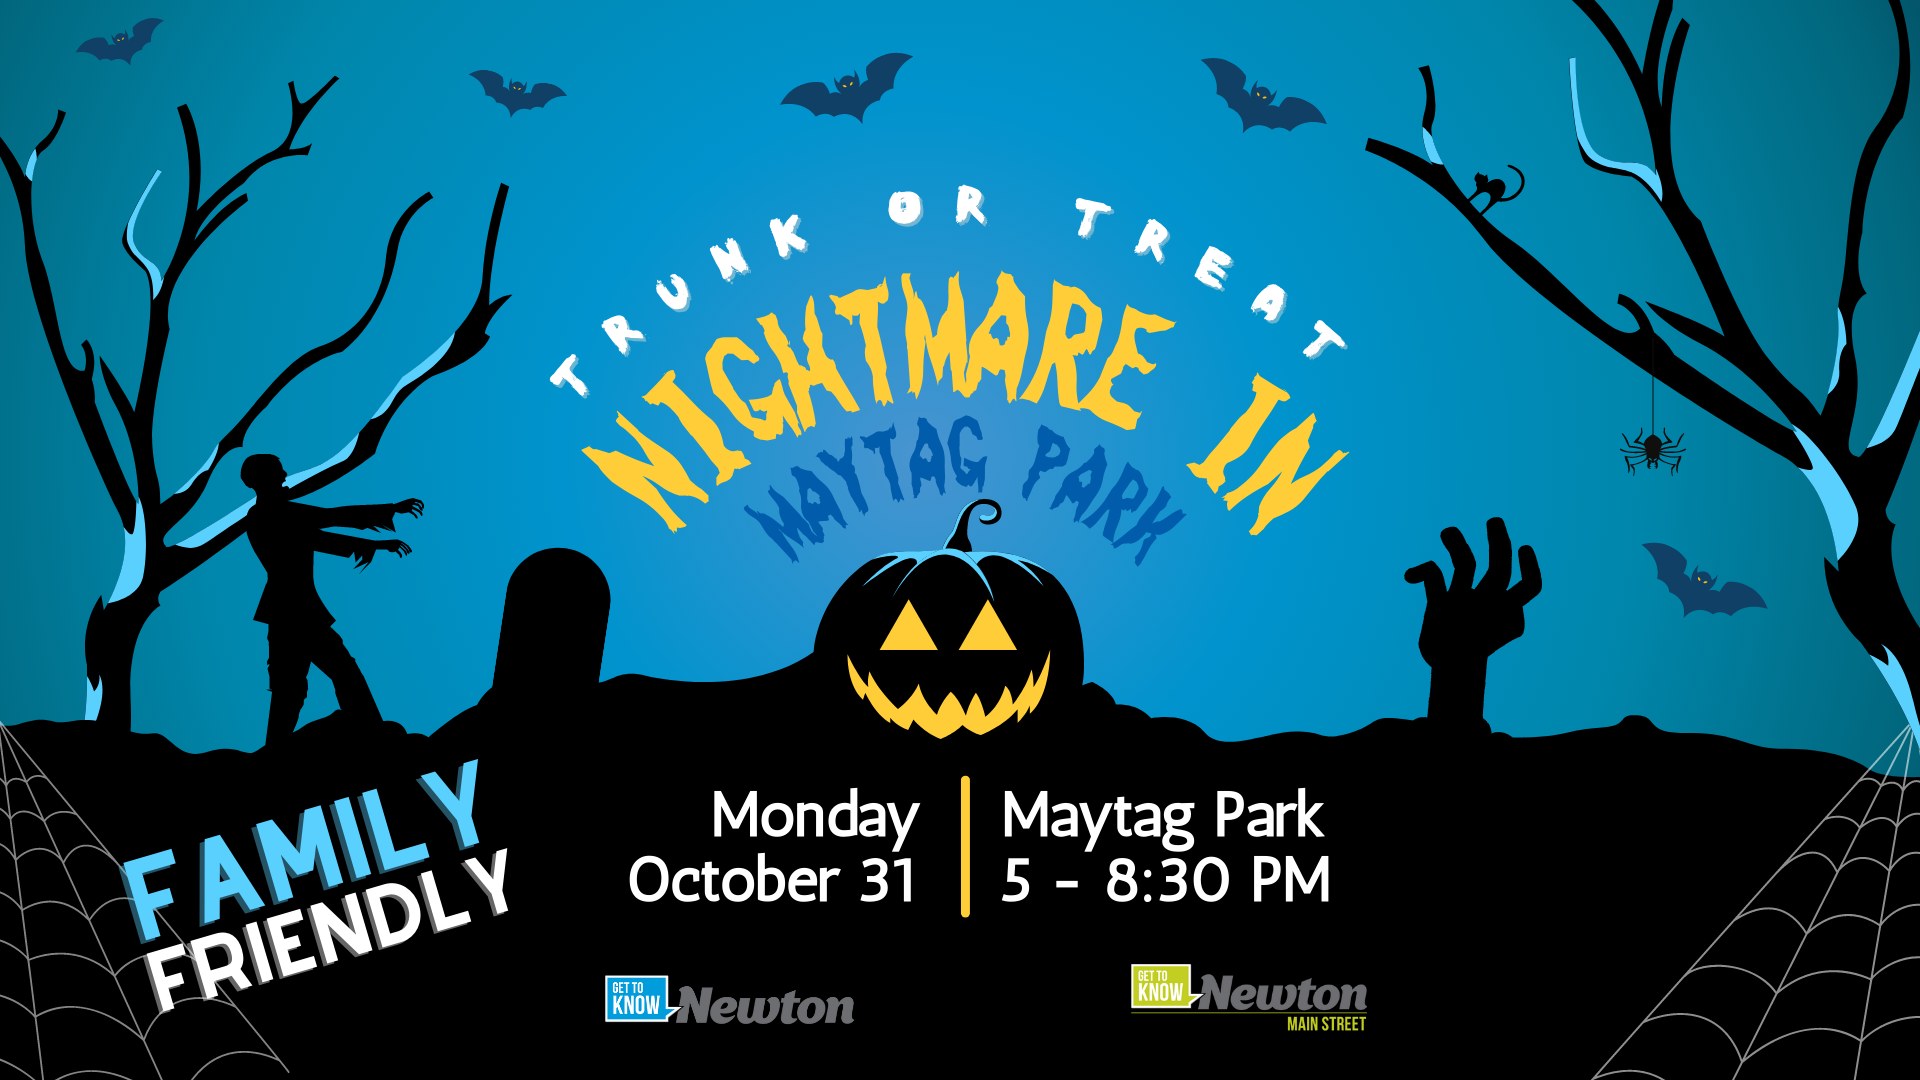 Event Promo Photo For Trunk or Treat Nightmare in Maytag Park